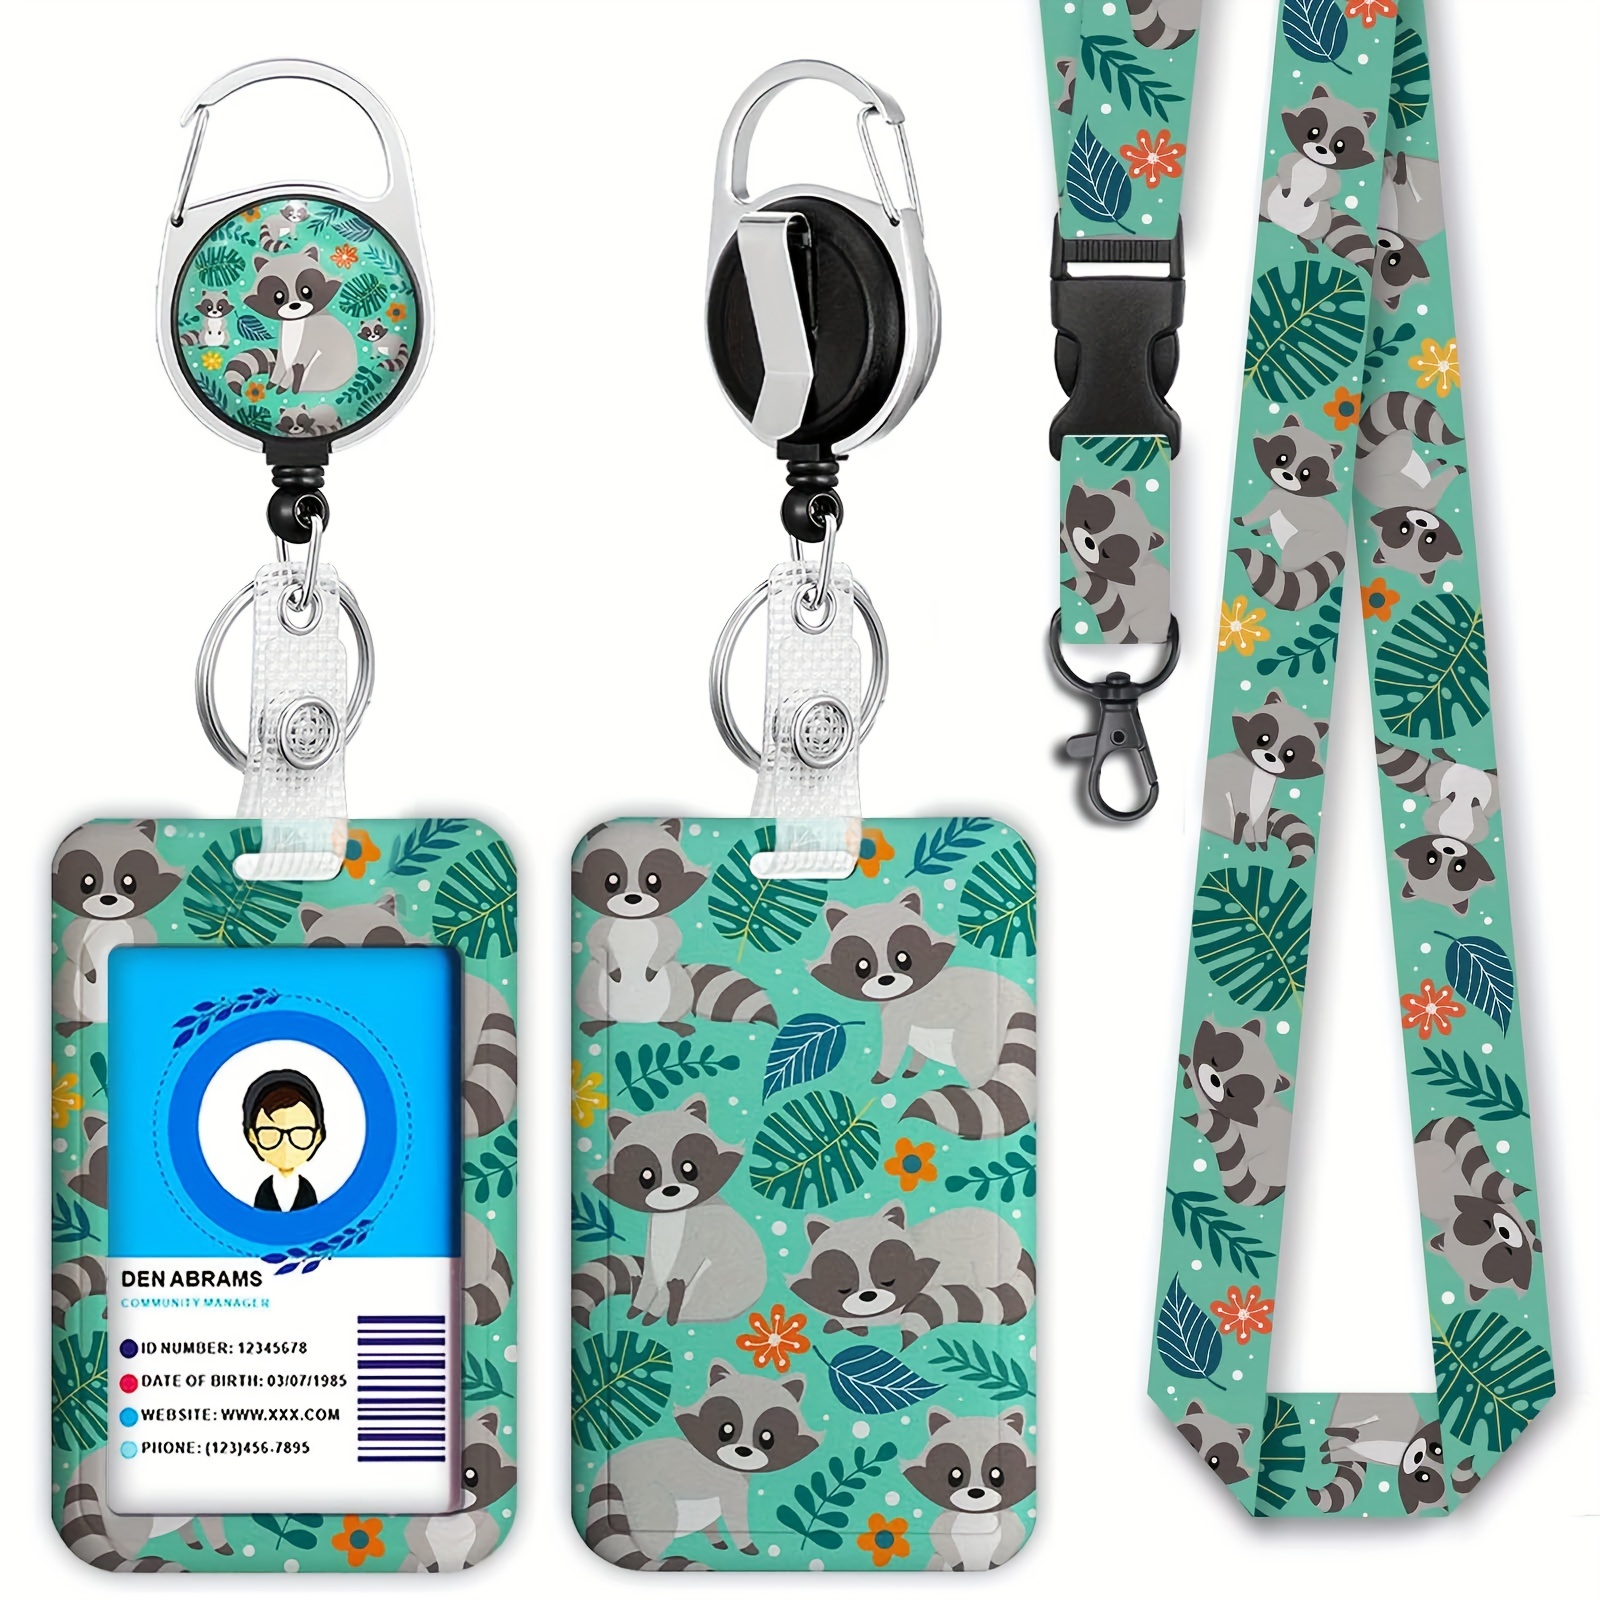  Cute Dinosaur Lanyards for Id Badges, Retractable ID Badge  Holder with Detachable Lanyard, Fashionable Badge Reel Heavy Duty with  Carabiner Clip, Nurse Teacher Office Gifts : Office Products